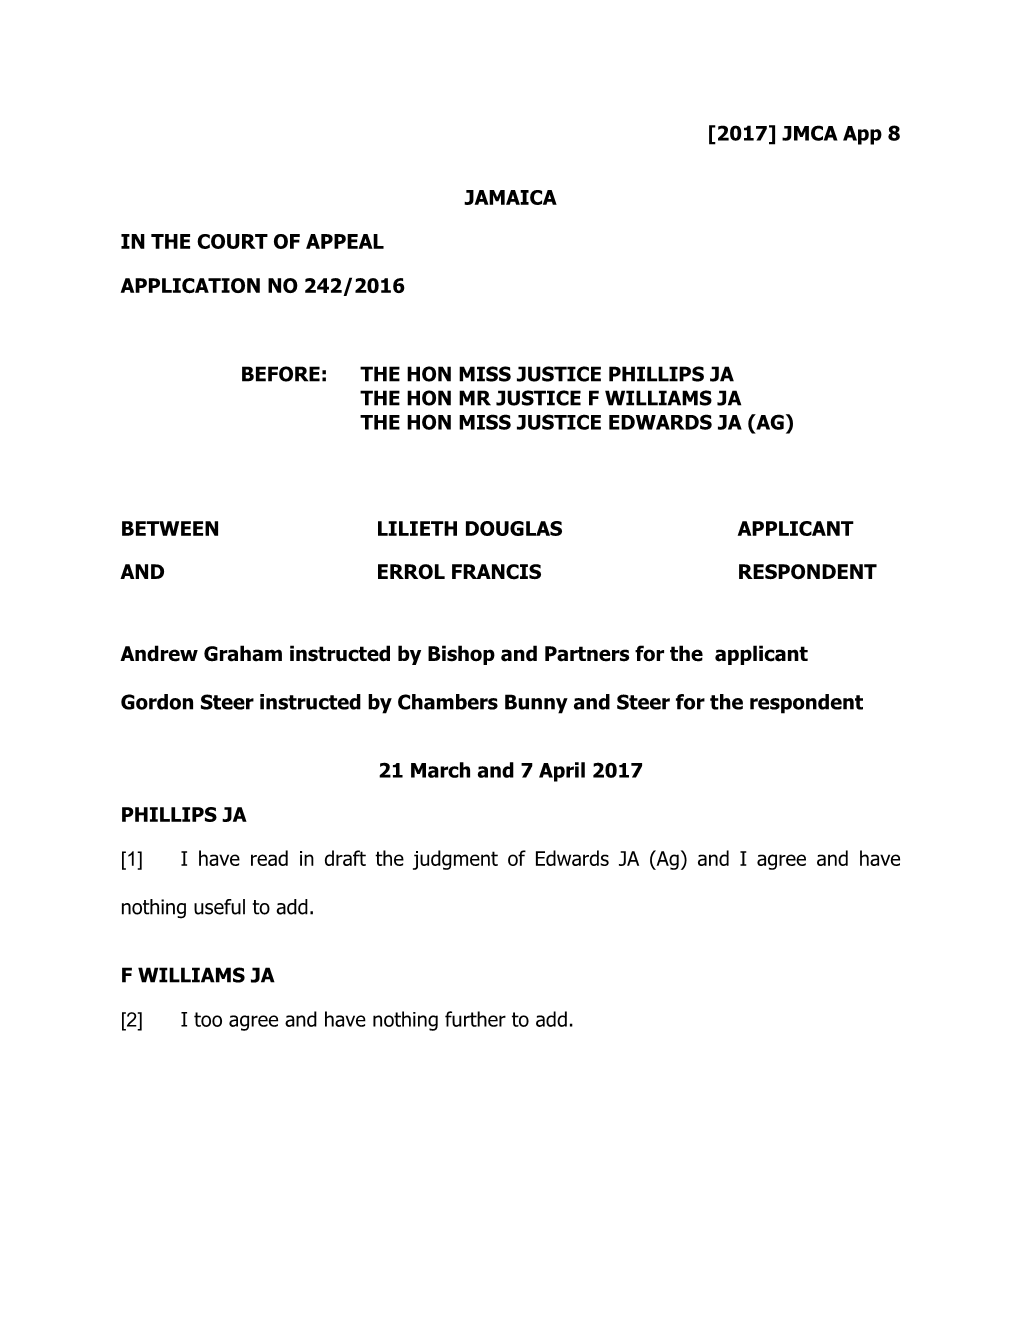 [2017] JMCA App 8 JAMAICA in the COURT of APPEAL APPLICATION NO 242/2016 BEFORE: the HON MISS JUSTICE PHILLIPS JA the HON MR